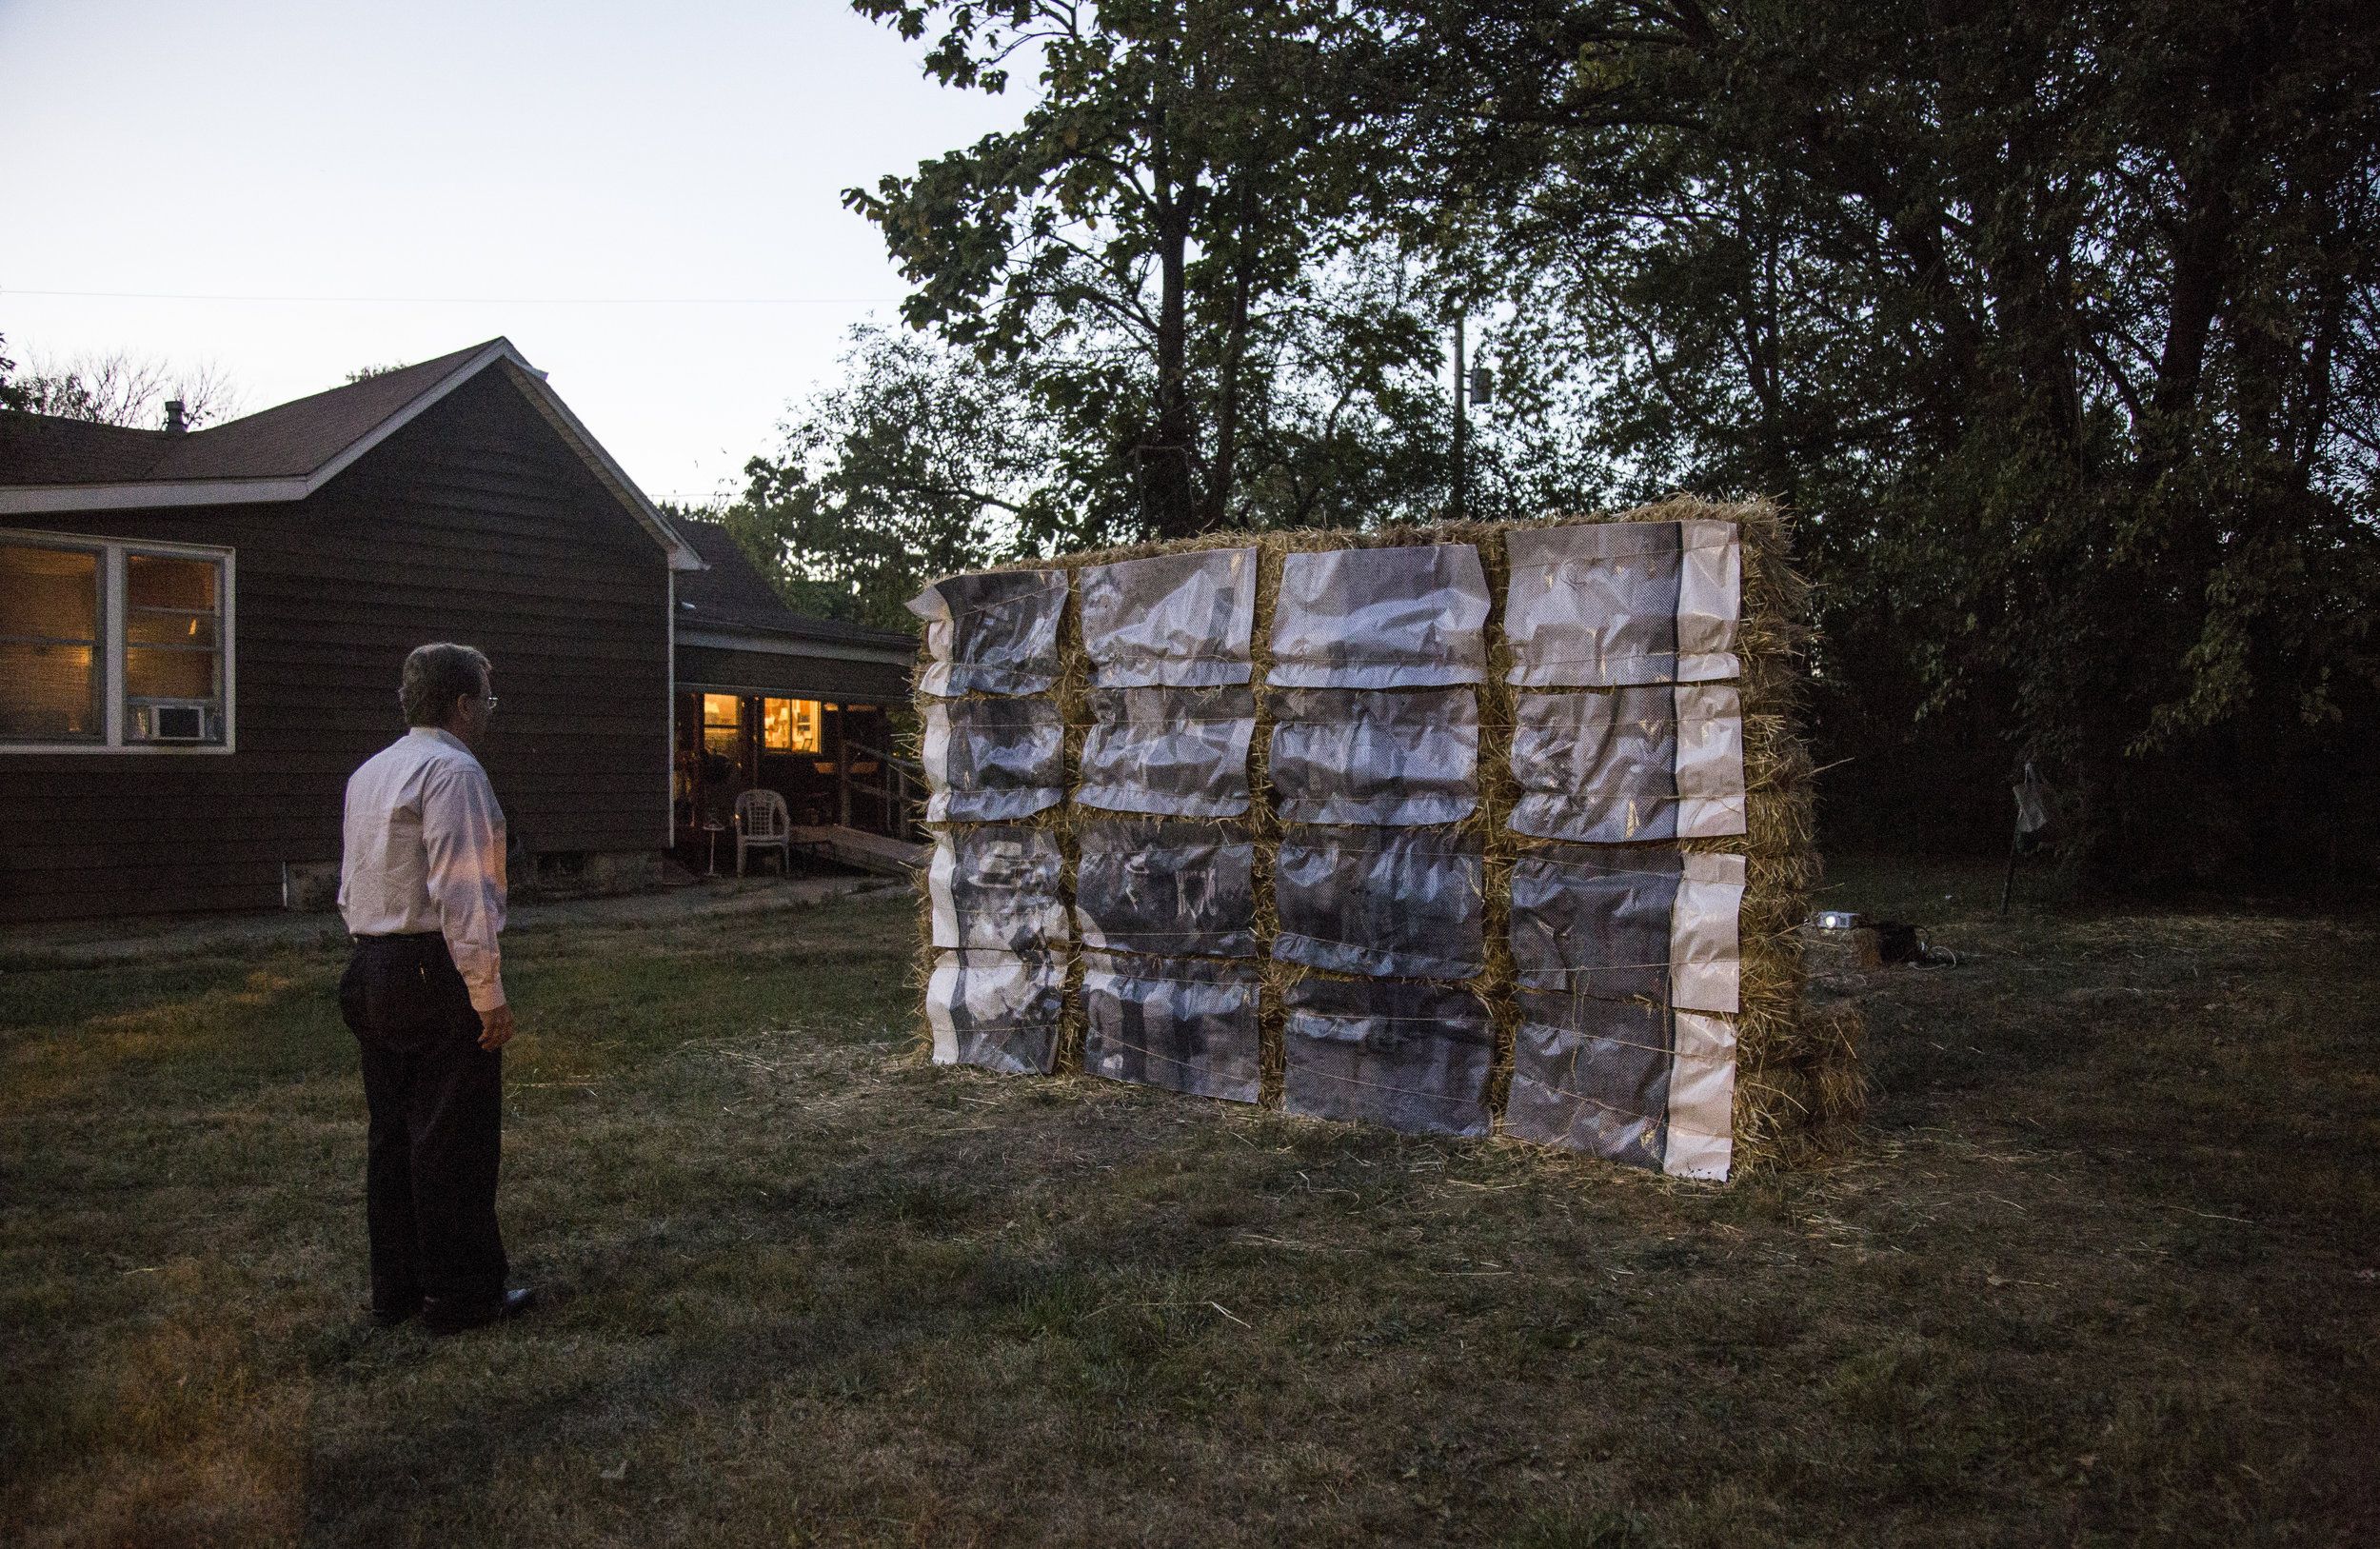 Image: Documentation image of Cass Davis’ Witness, 2017 taken at sunset. The piece is made up of 30 hay bales, bailing twine, and an archival reproduction of a photograph from the 1908 Springfield Race Riot. Hay bales are stacked horizontally and vertically to achieve height. The archival photograph has been enlarged and cut into 16 even-sized rectangles and attached to the hay bales with twine. The piece is displayed on a vacant lot of grass with trees in the background and a house in the neighboring lot. A man wearing black pants and a long sleeve collared shirt faces the installation. Photo by the artist. Archival photograph courtesy of the University of Illinois, Springfield Archives.